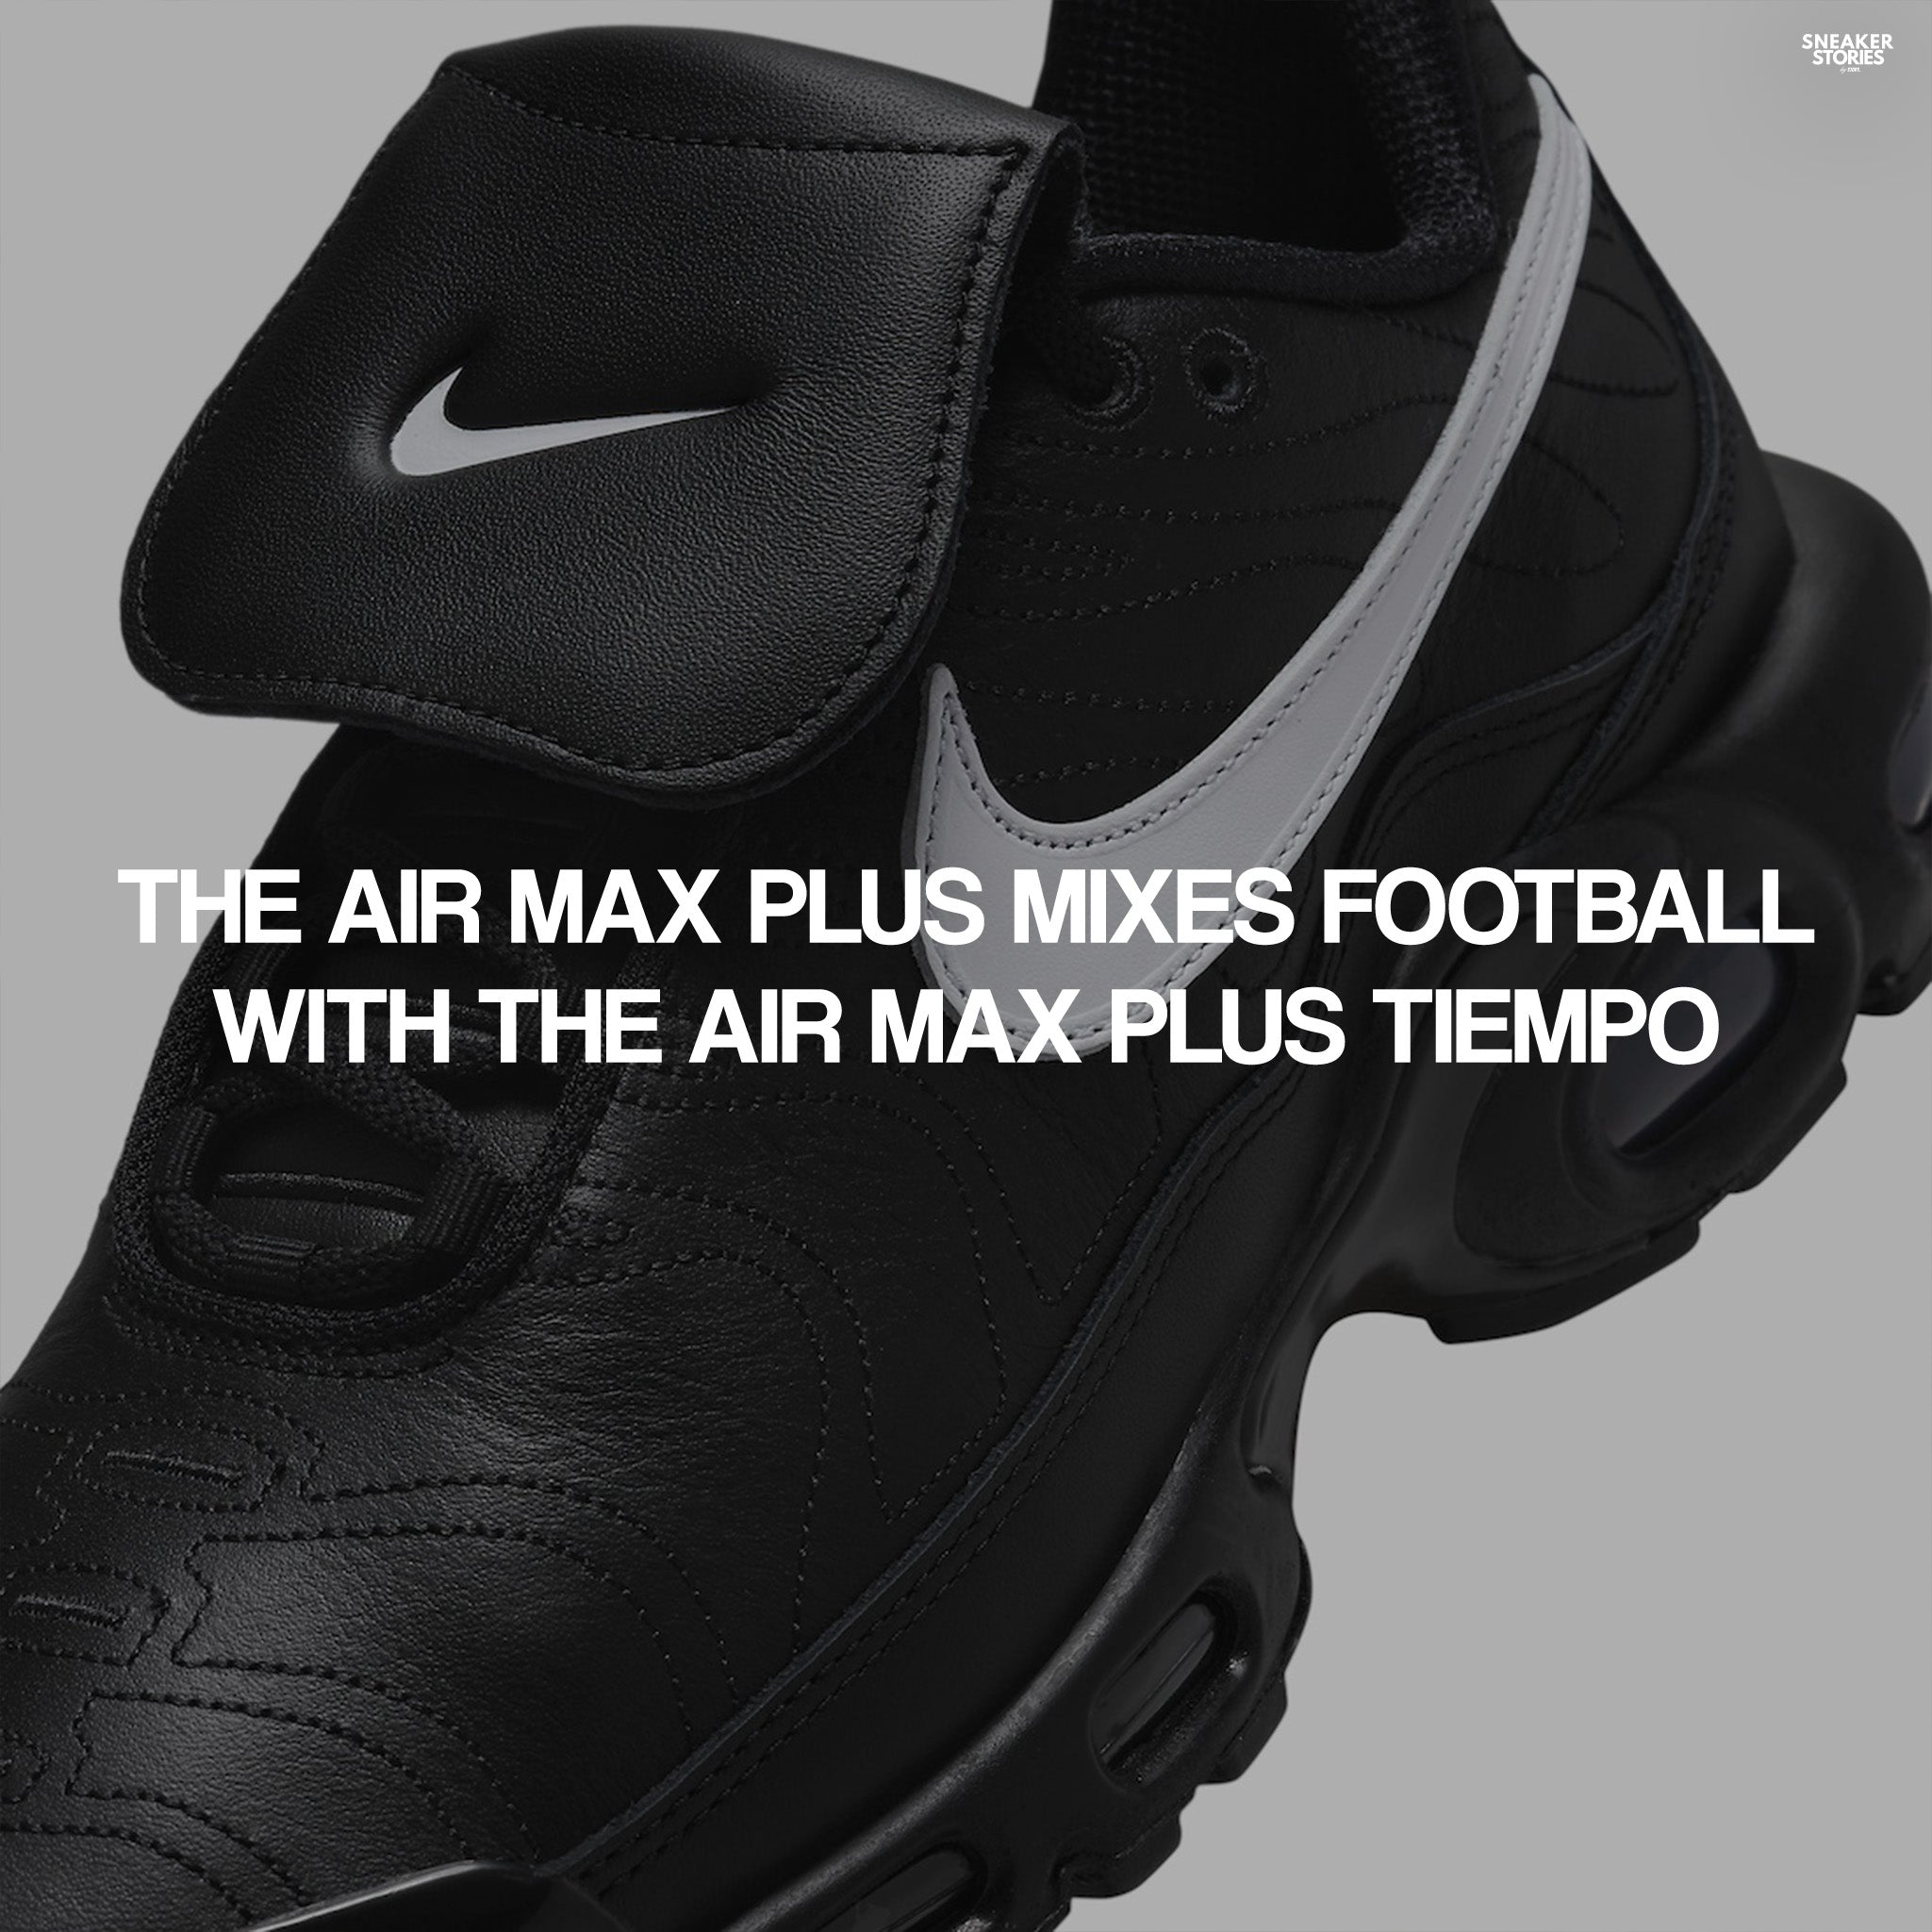 The Air max plus mixes football with the Air max plus Tiempo